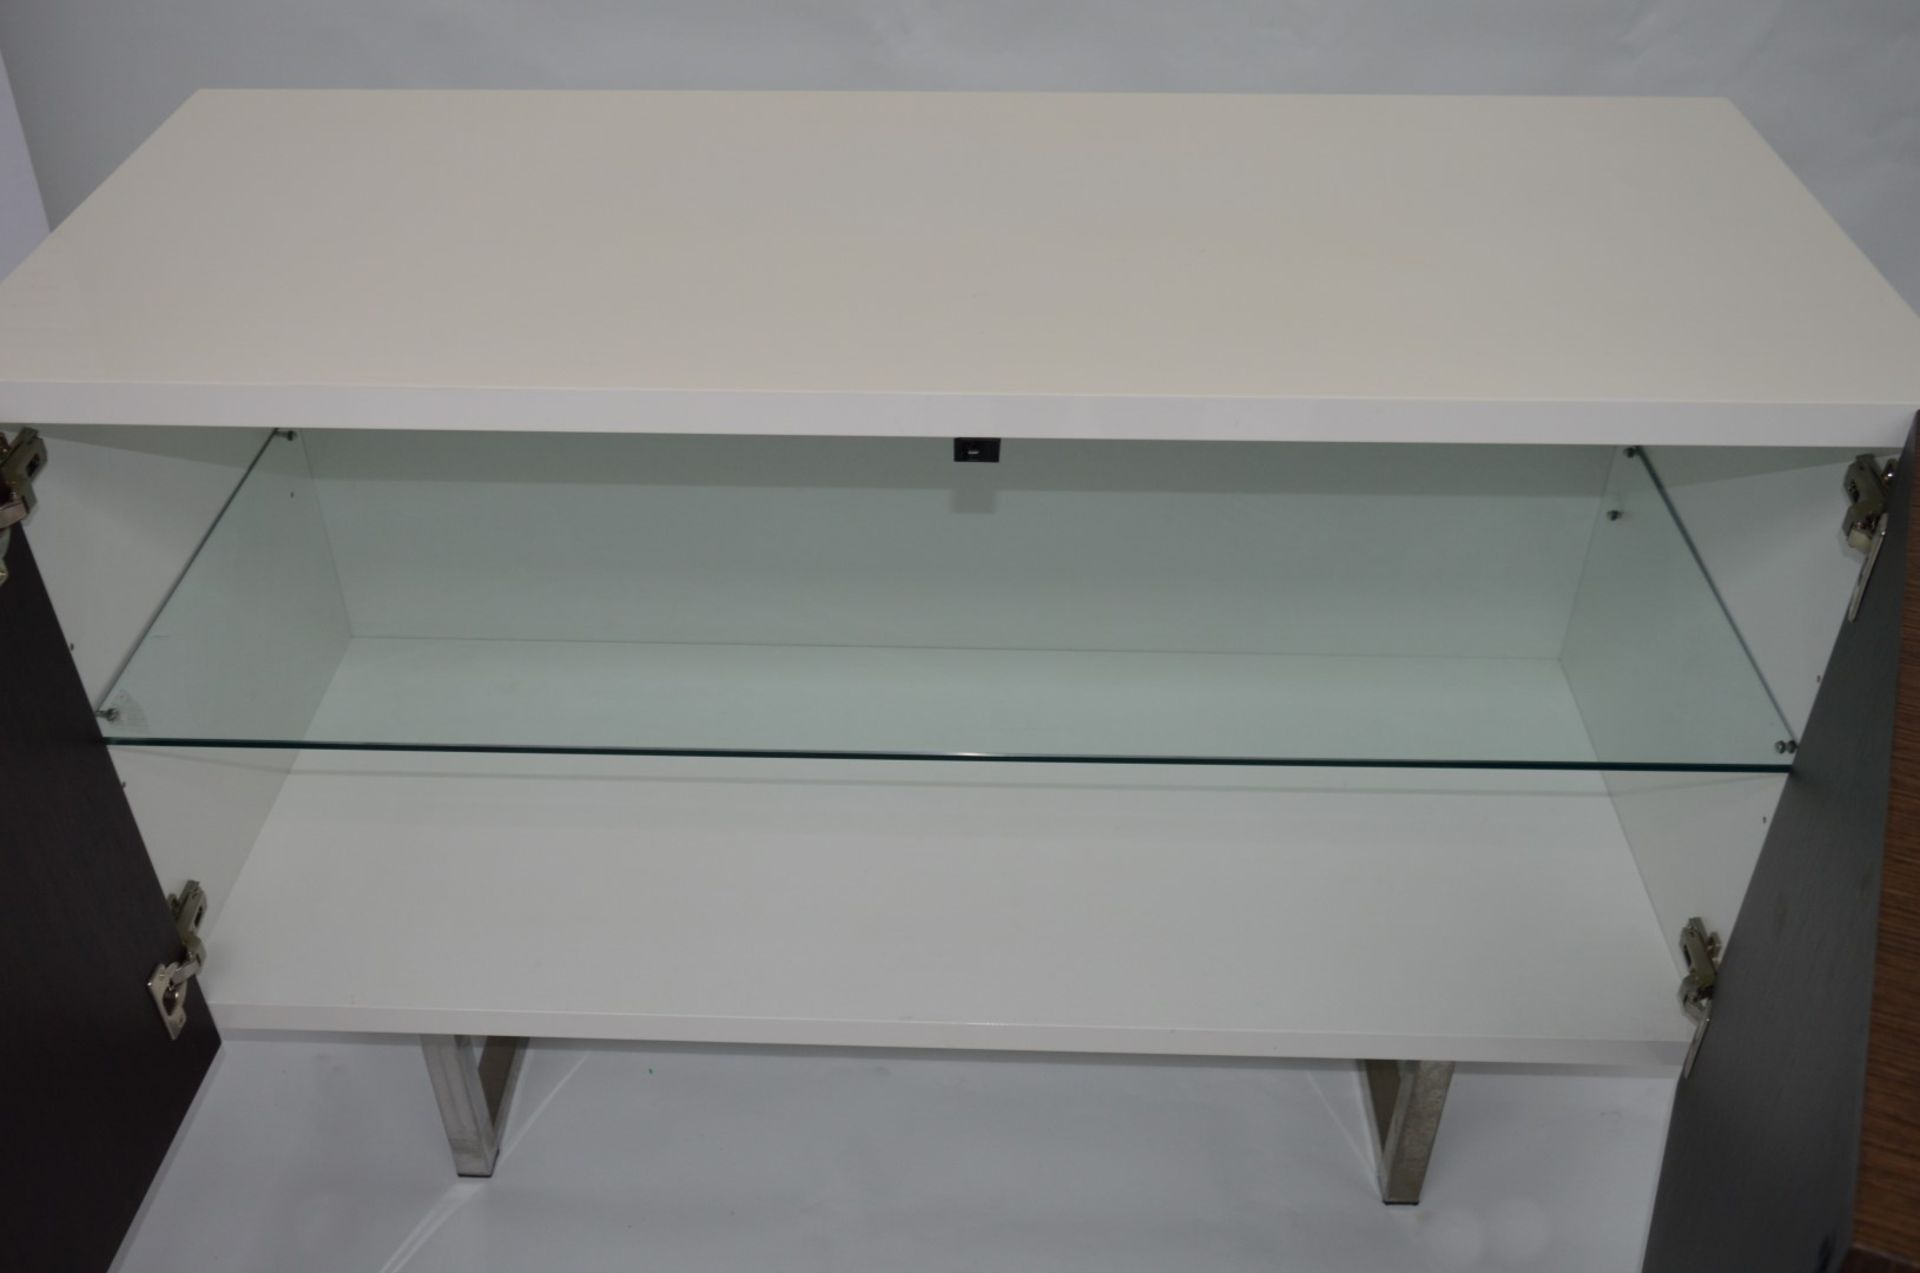 1 x Calligaris Seattle Glossy White 2 Door Sideboard - (cs6004-1) - Ref: 1670447 - CL087 - Location: - Image 4 of 7